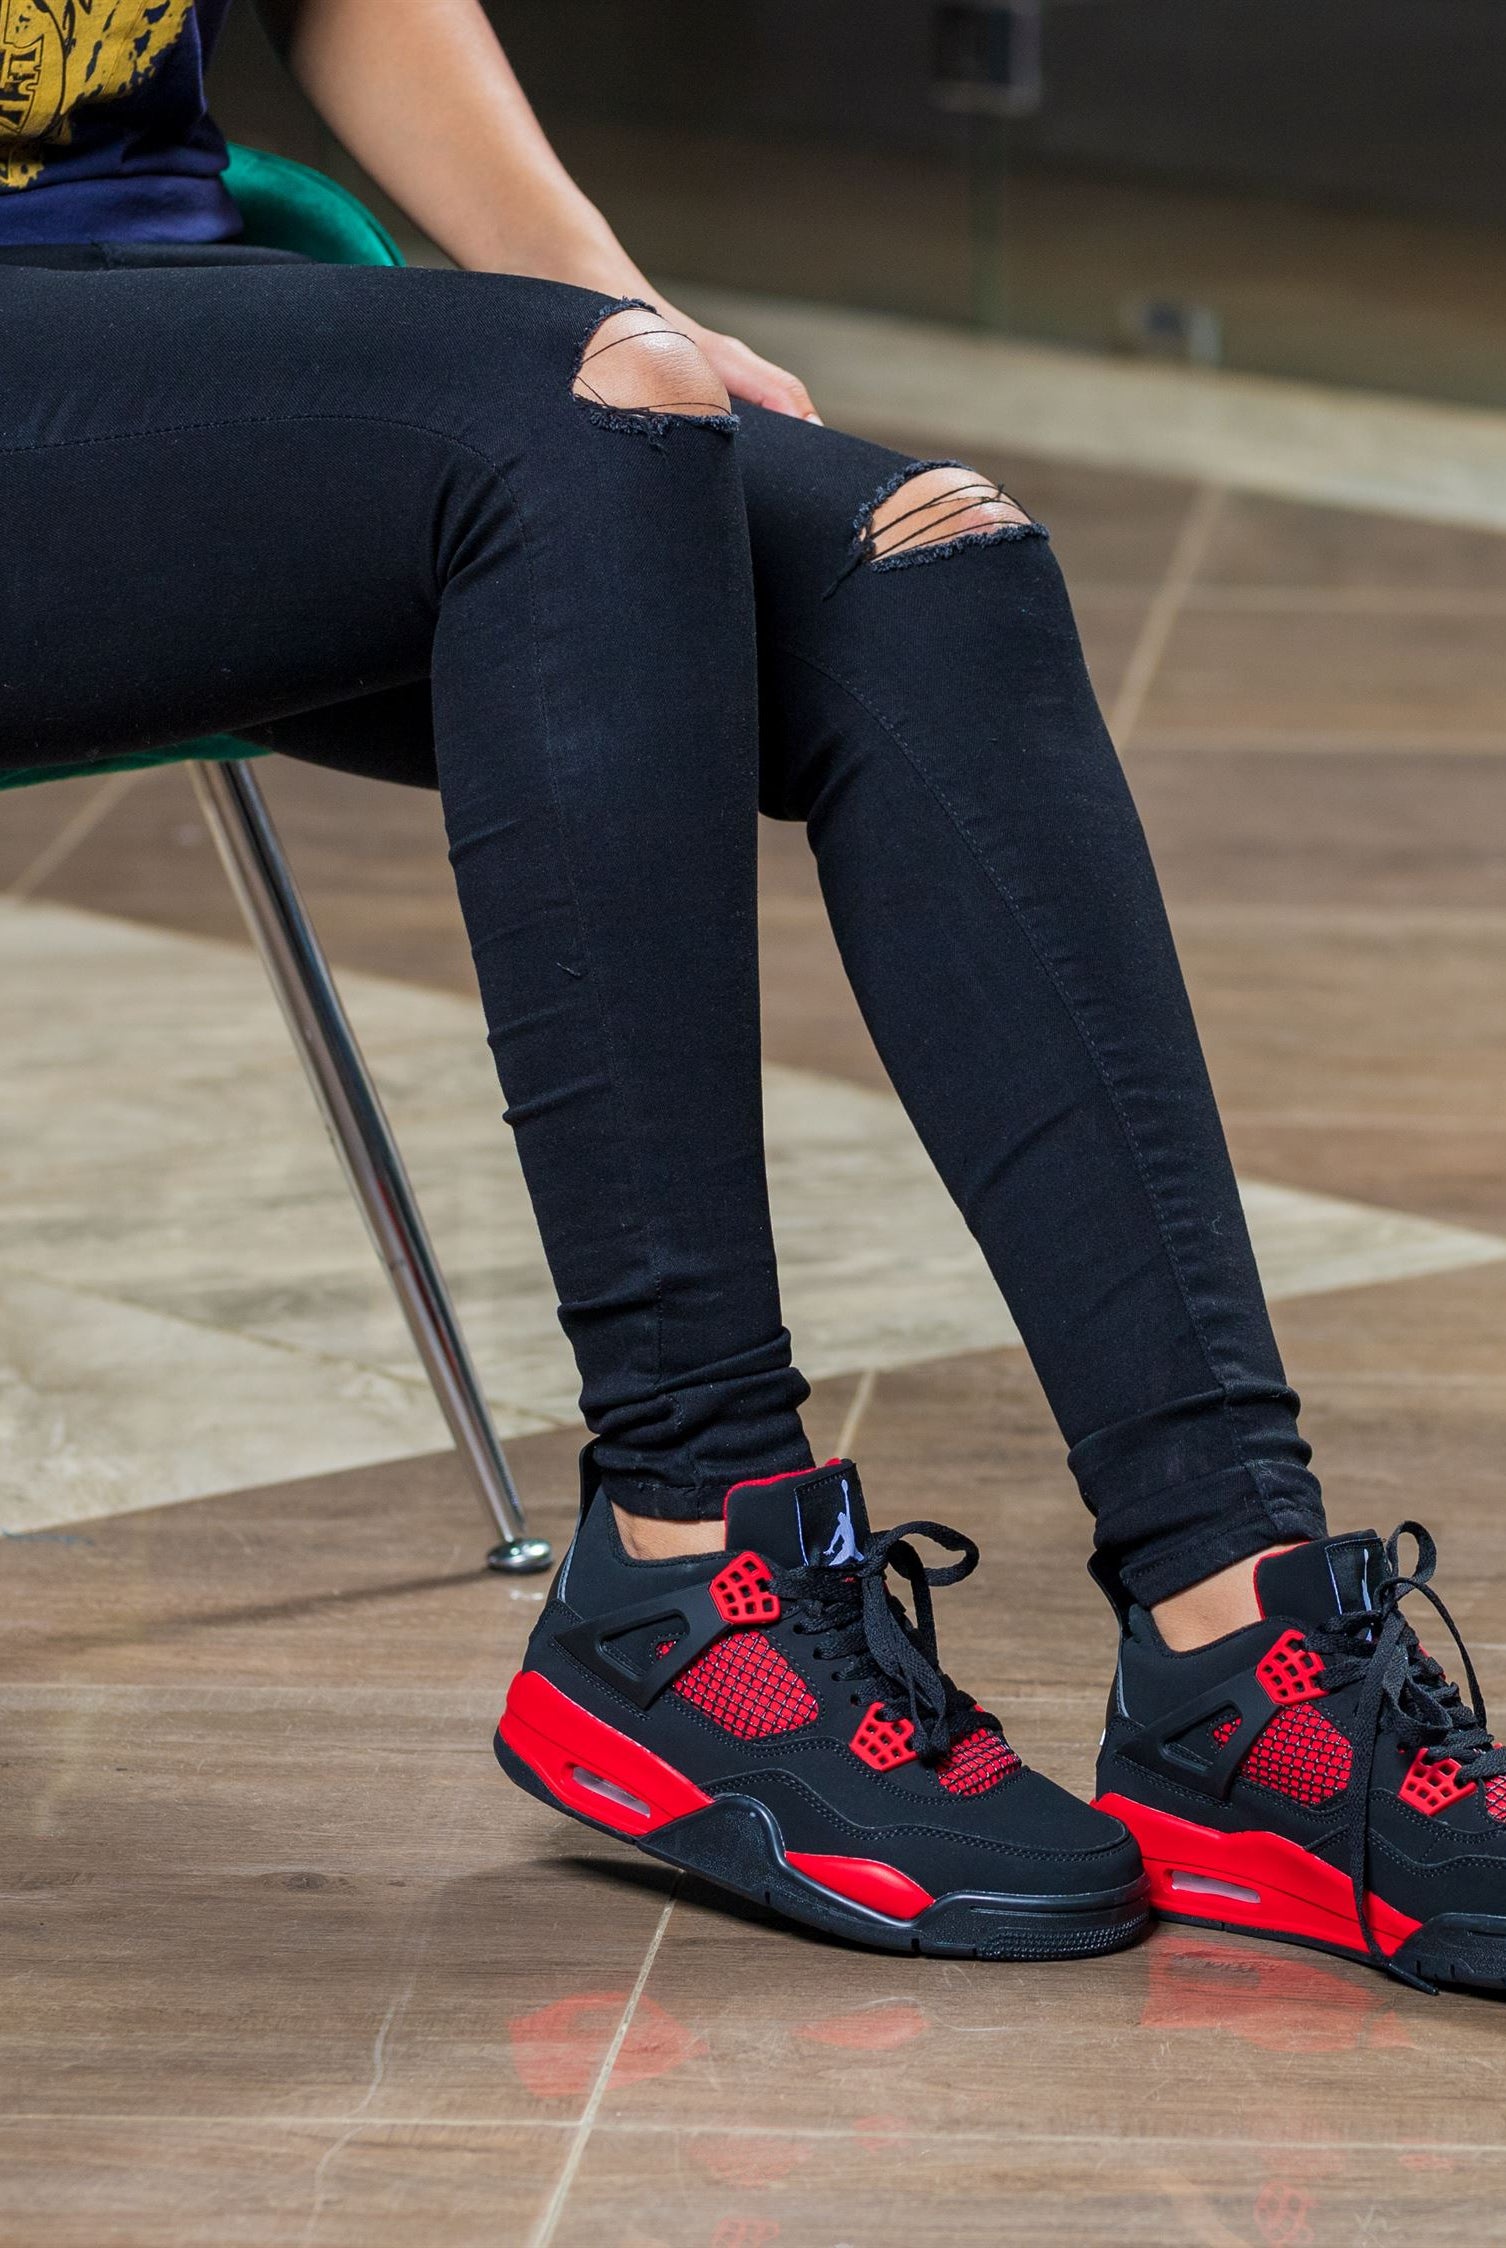 Hii-J4s Fights - Black and Red - Shop Kenya - Affordable Fashion Hii-J4s Fights - Black and Red hiiii_style accessories Sneakers jordan-4-black-and-res Black, Black sneakers, Buena Shoes, Discounted, j4, j4's, jordans, Low dunks, Nike, Offer, ON SALE, onsale, red, Red thunder, Sale, shoes, Sneakers Shop Kenya - Affordable Fashion